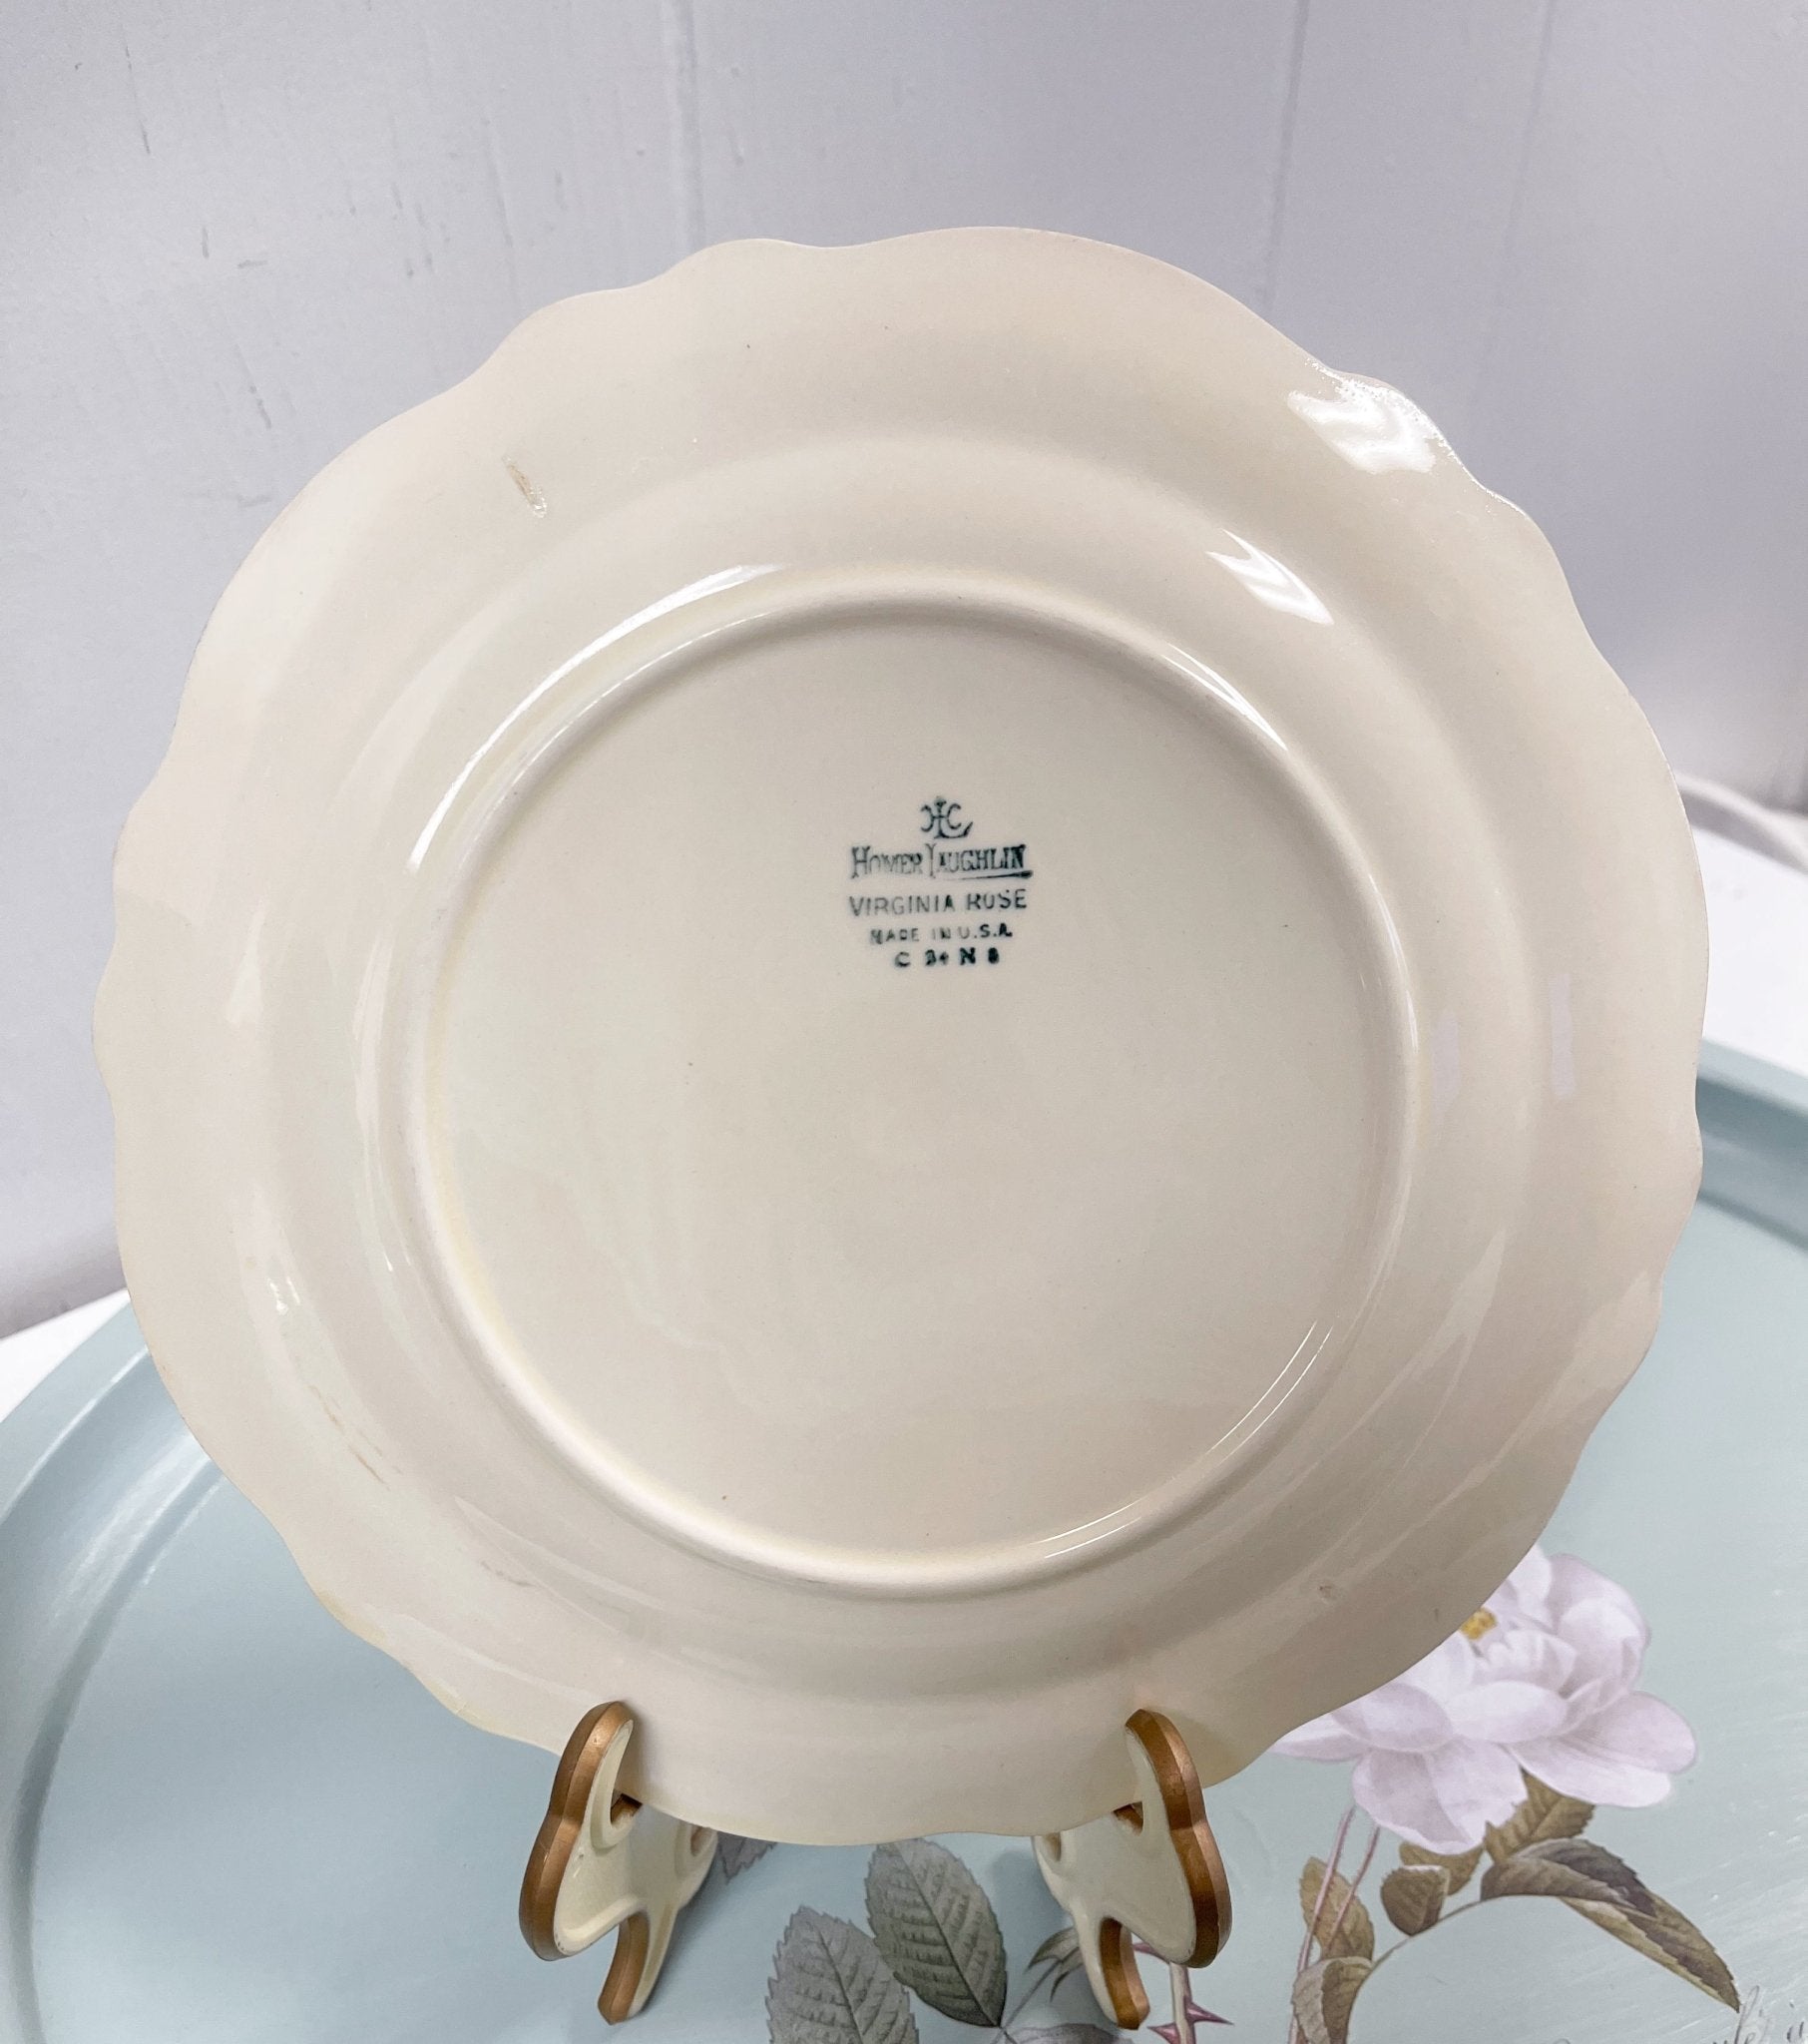 Silver Rose Patrician Salad Plate by Homer Laughlin-Homer Laughlin-Salad Plate-Stockton Farm